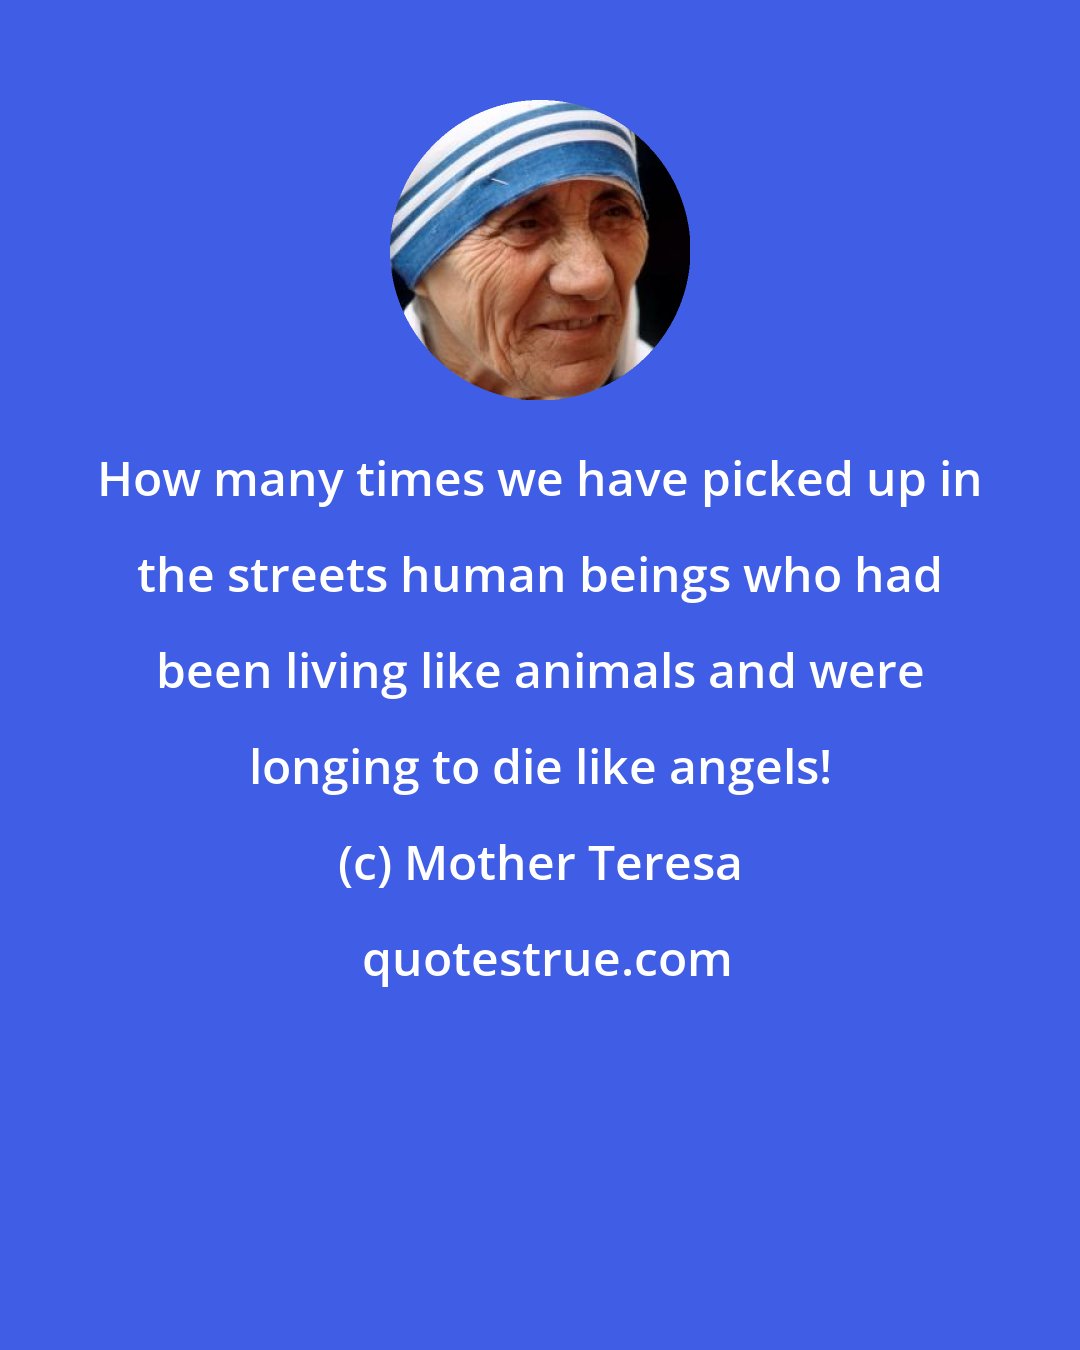 Mother Teresa: How many times we have picked up in the streets human beings who had been living like animals and were longing to die like angels!